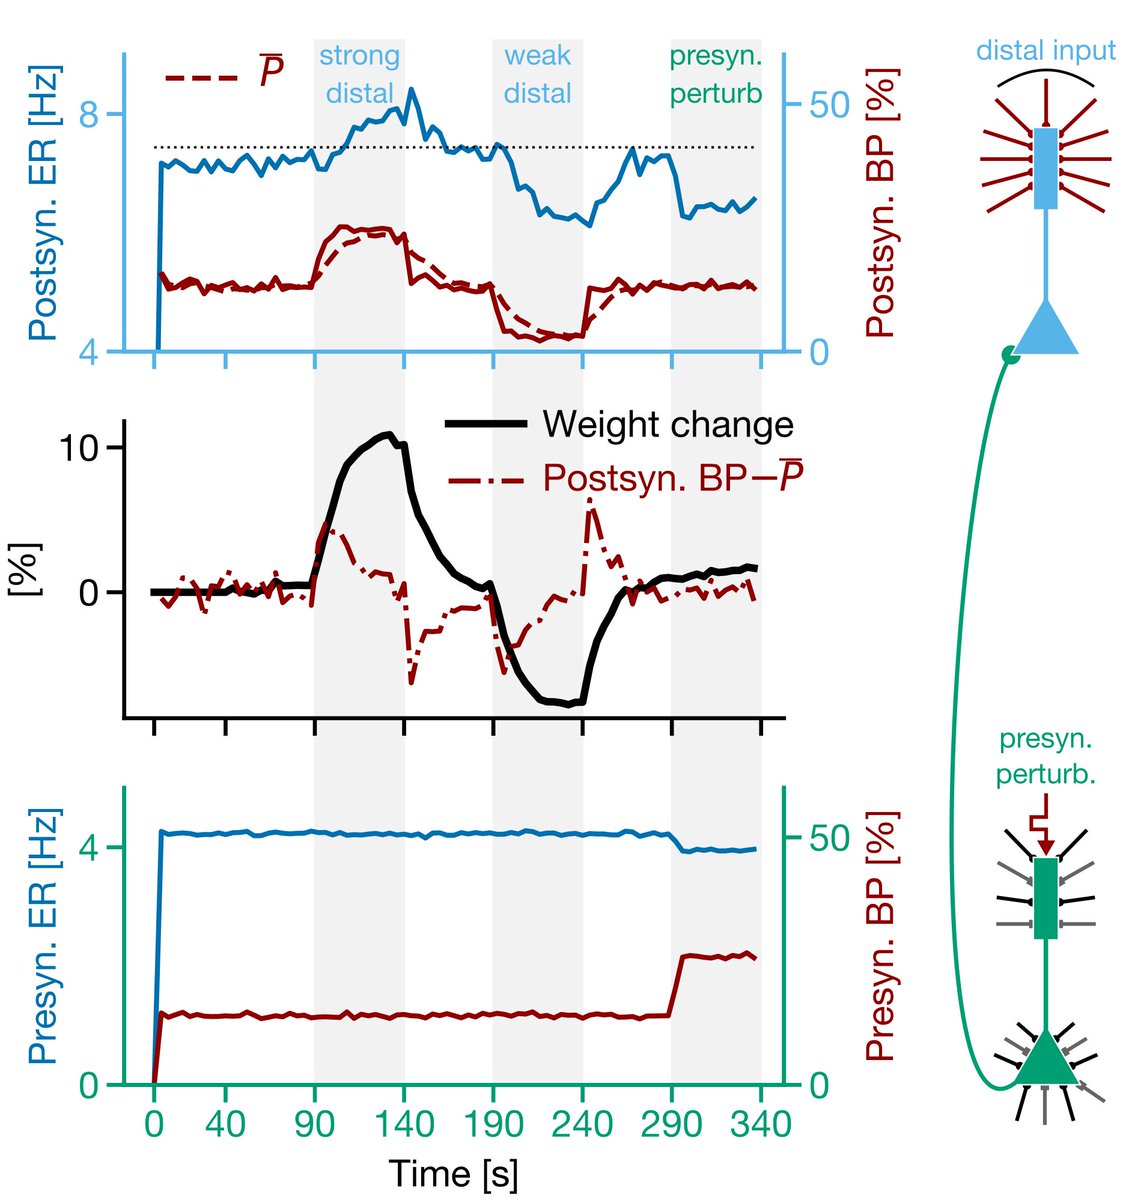 7/ Moreover, if you combine BDSP with the fact that bursts are generated by coincident apical and basal inputs in pyramidal neurons (e.g.  https://www.nature.com/articles/18686 ), then the inputs to the apical dendrites become a teaching signal, telling a neuron whether to engage in LTP or LTD.